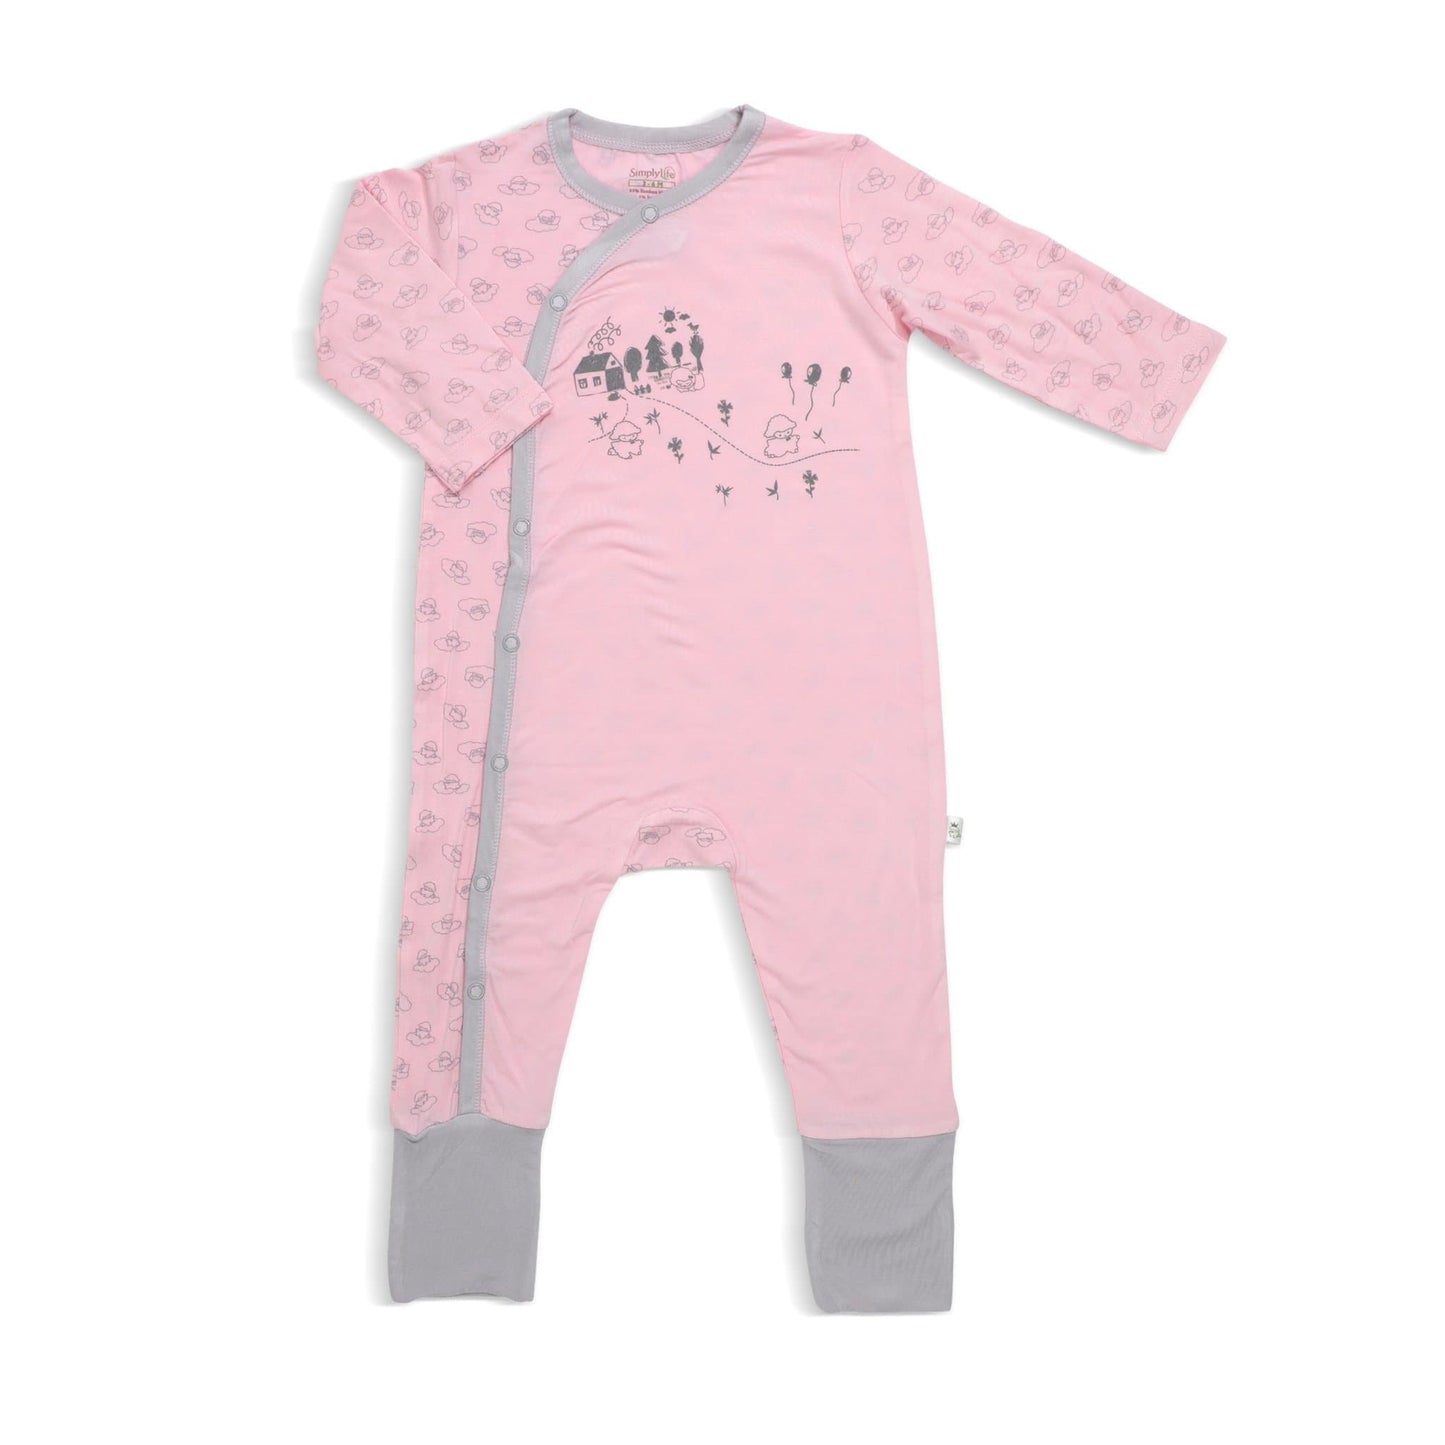 Adorable Lamb - Sleepsuit with Side Snap Button and Spot Print - Folded Footie by simplylifebaby